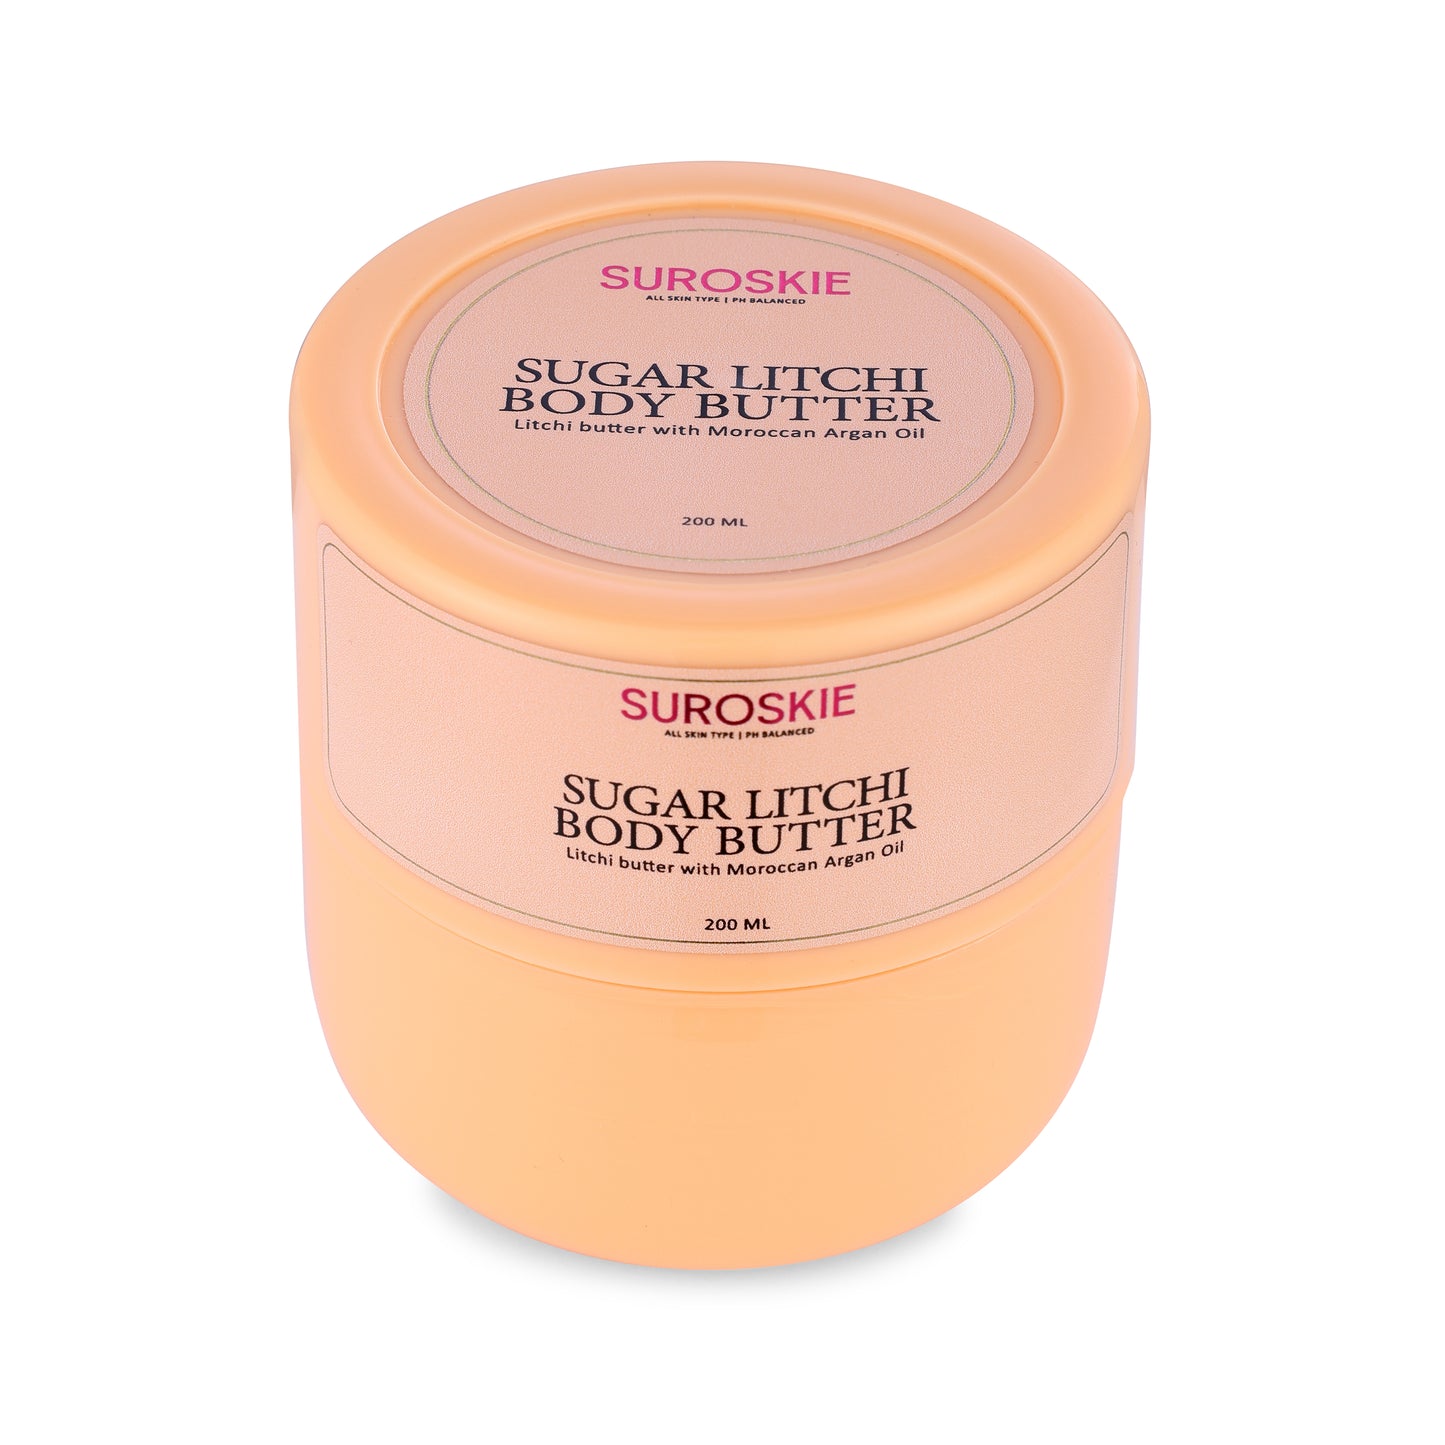 Pack of 2 Sugar Litchi Body Butter